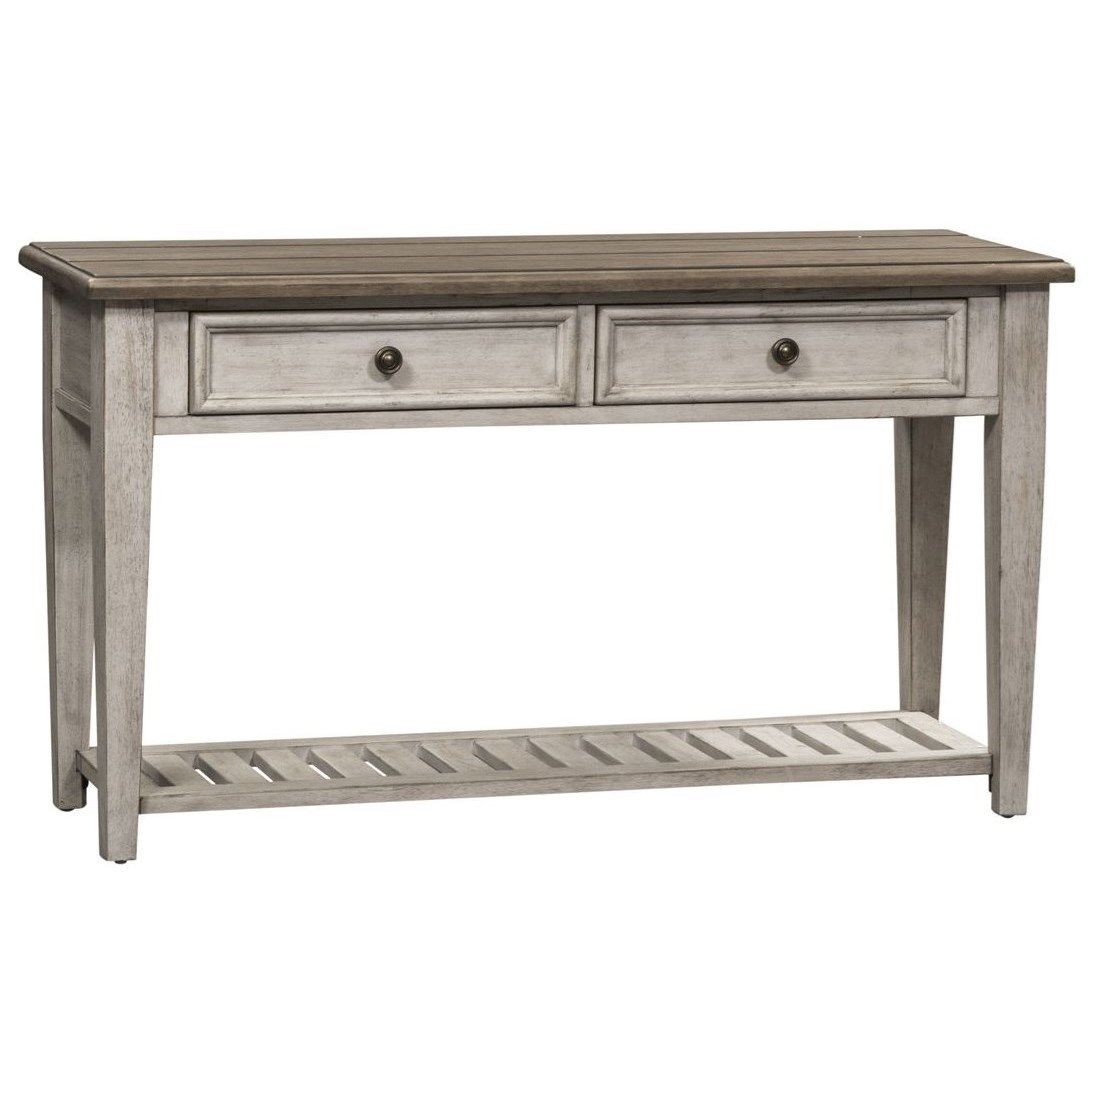 Liberty Furniture Heartland Transitional 2 Drawer Sofa Table | Lindy's Within 2 Drawer Oval Console Tables (View 11 of 20)